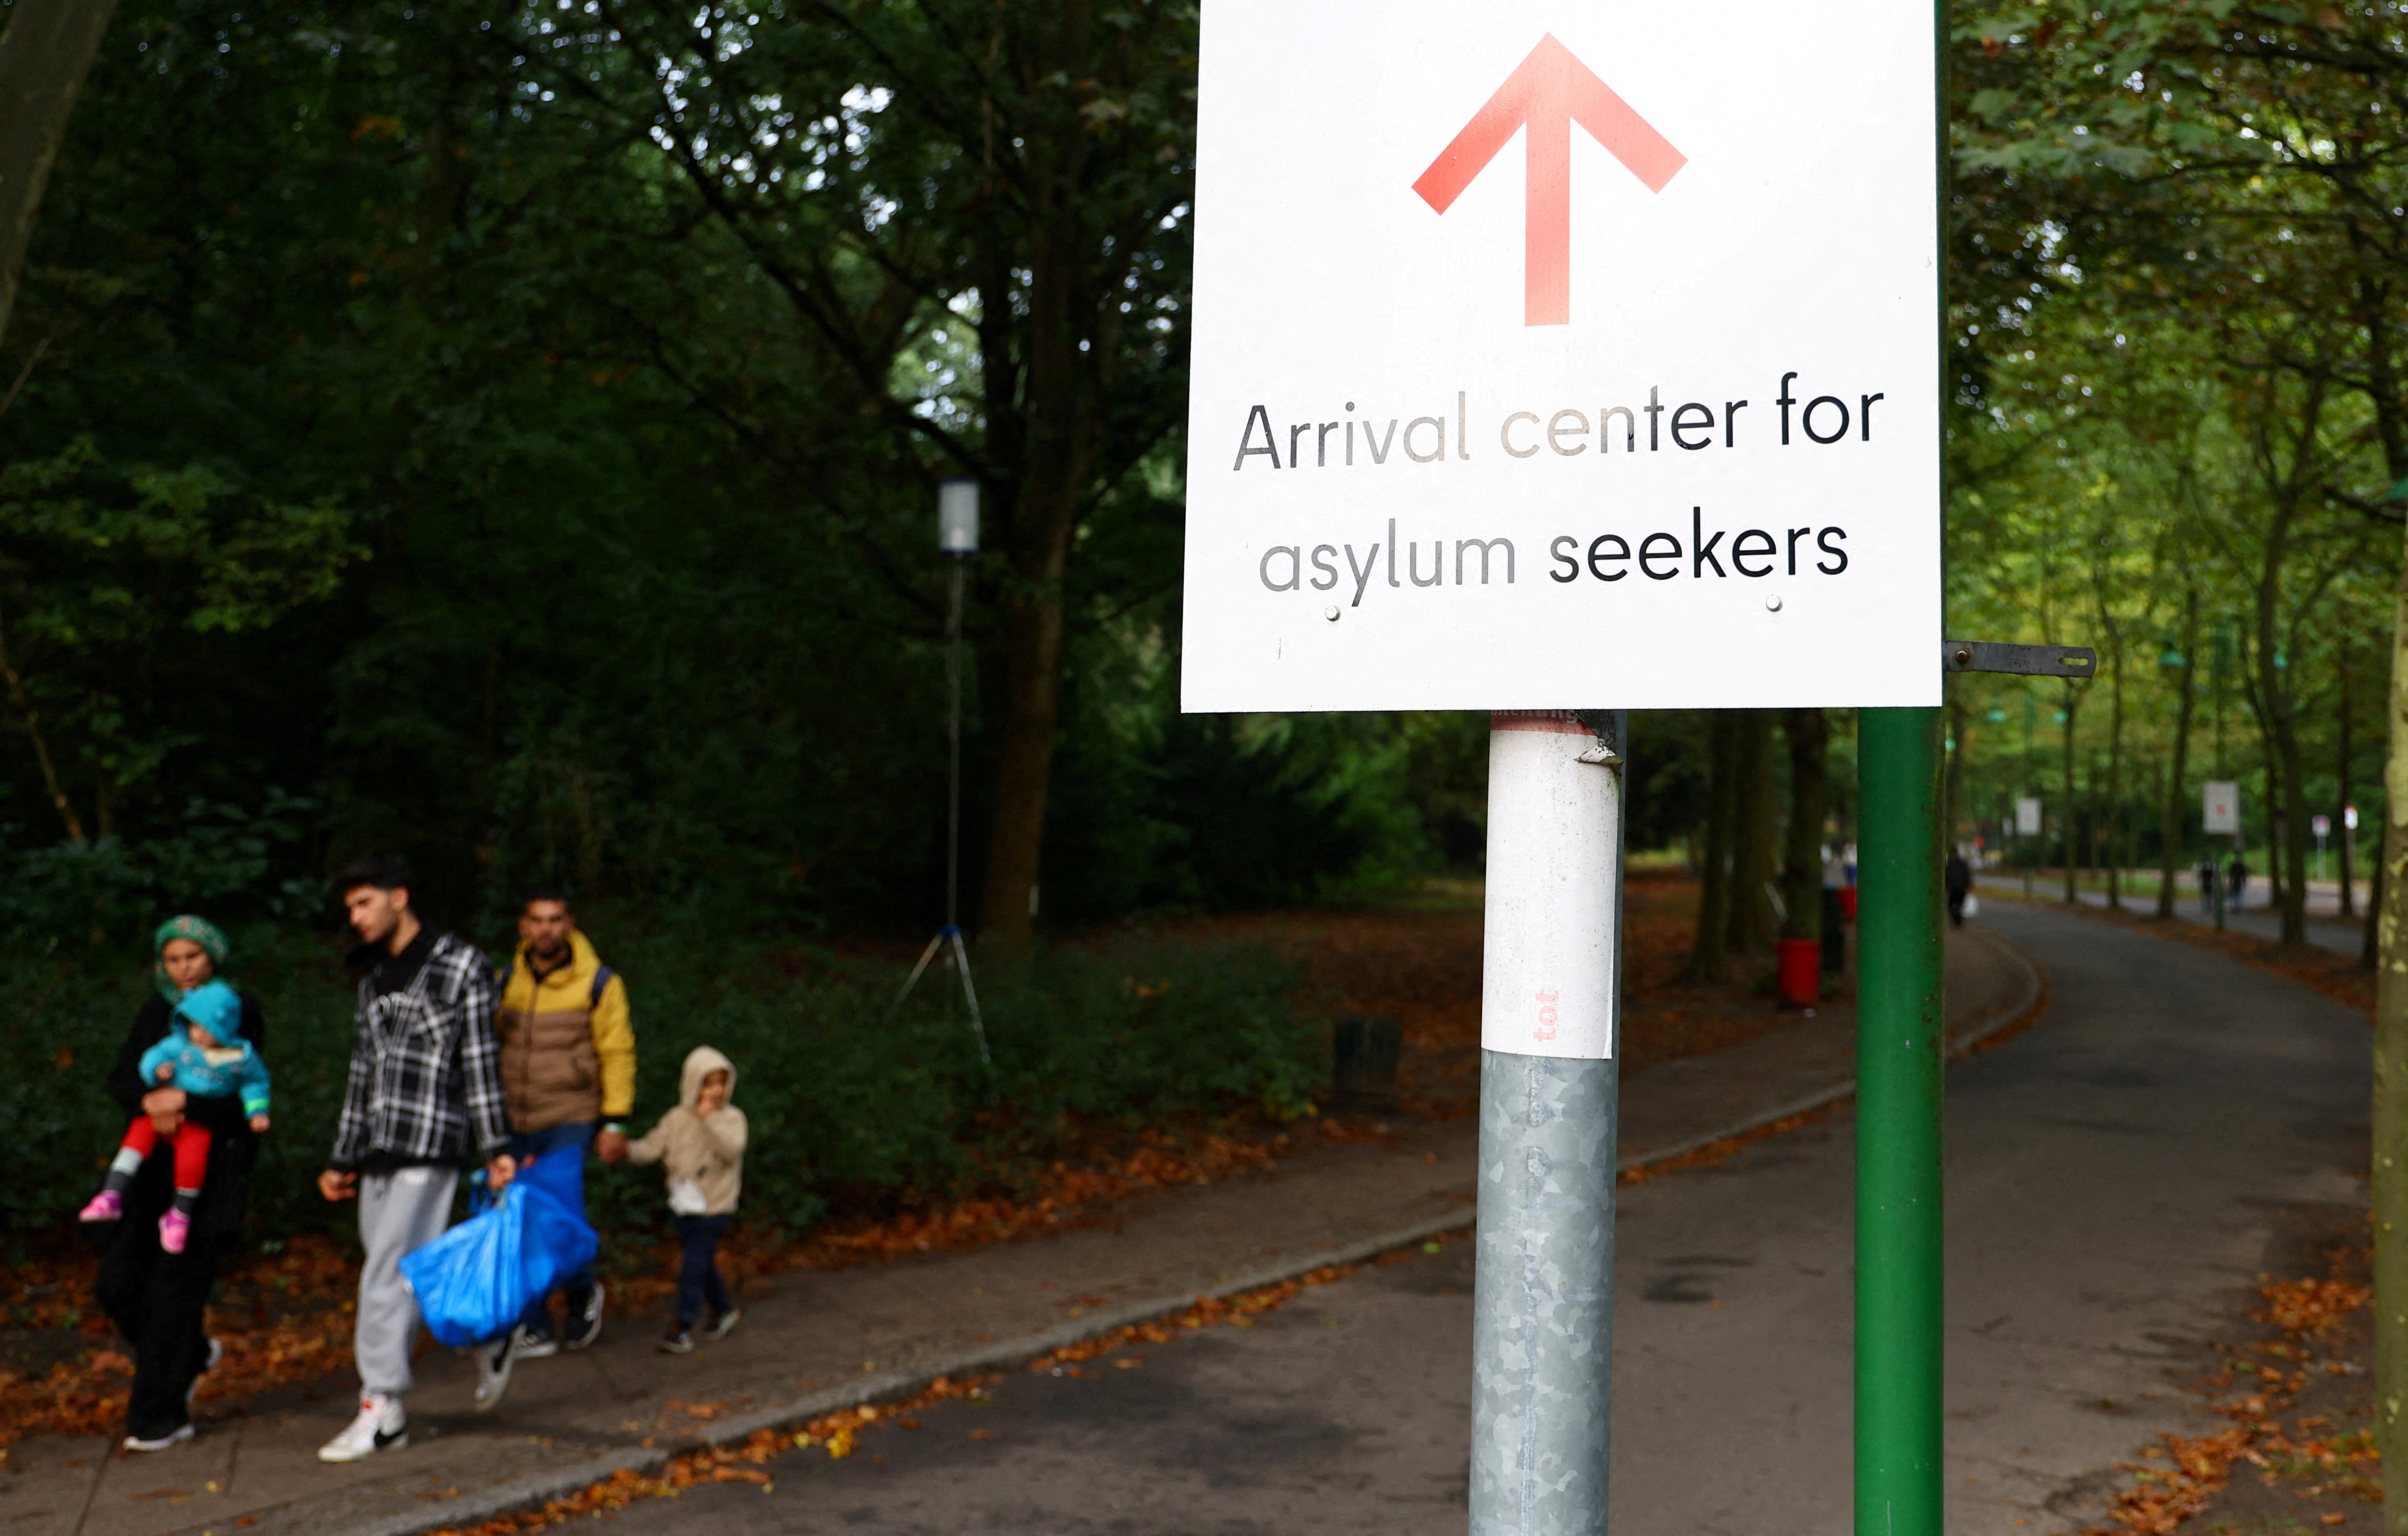 Migrants are pictured at the arrival center for asylum seekers at Berlin's Reinickendorf district